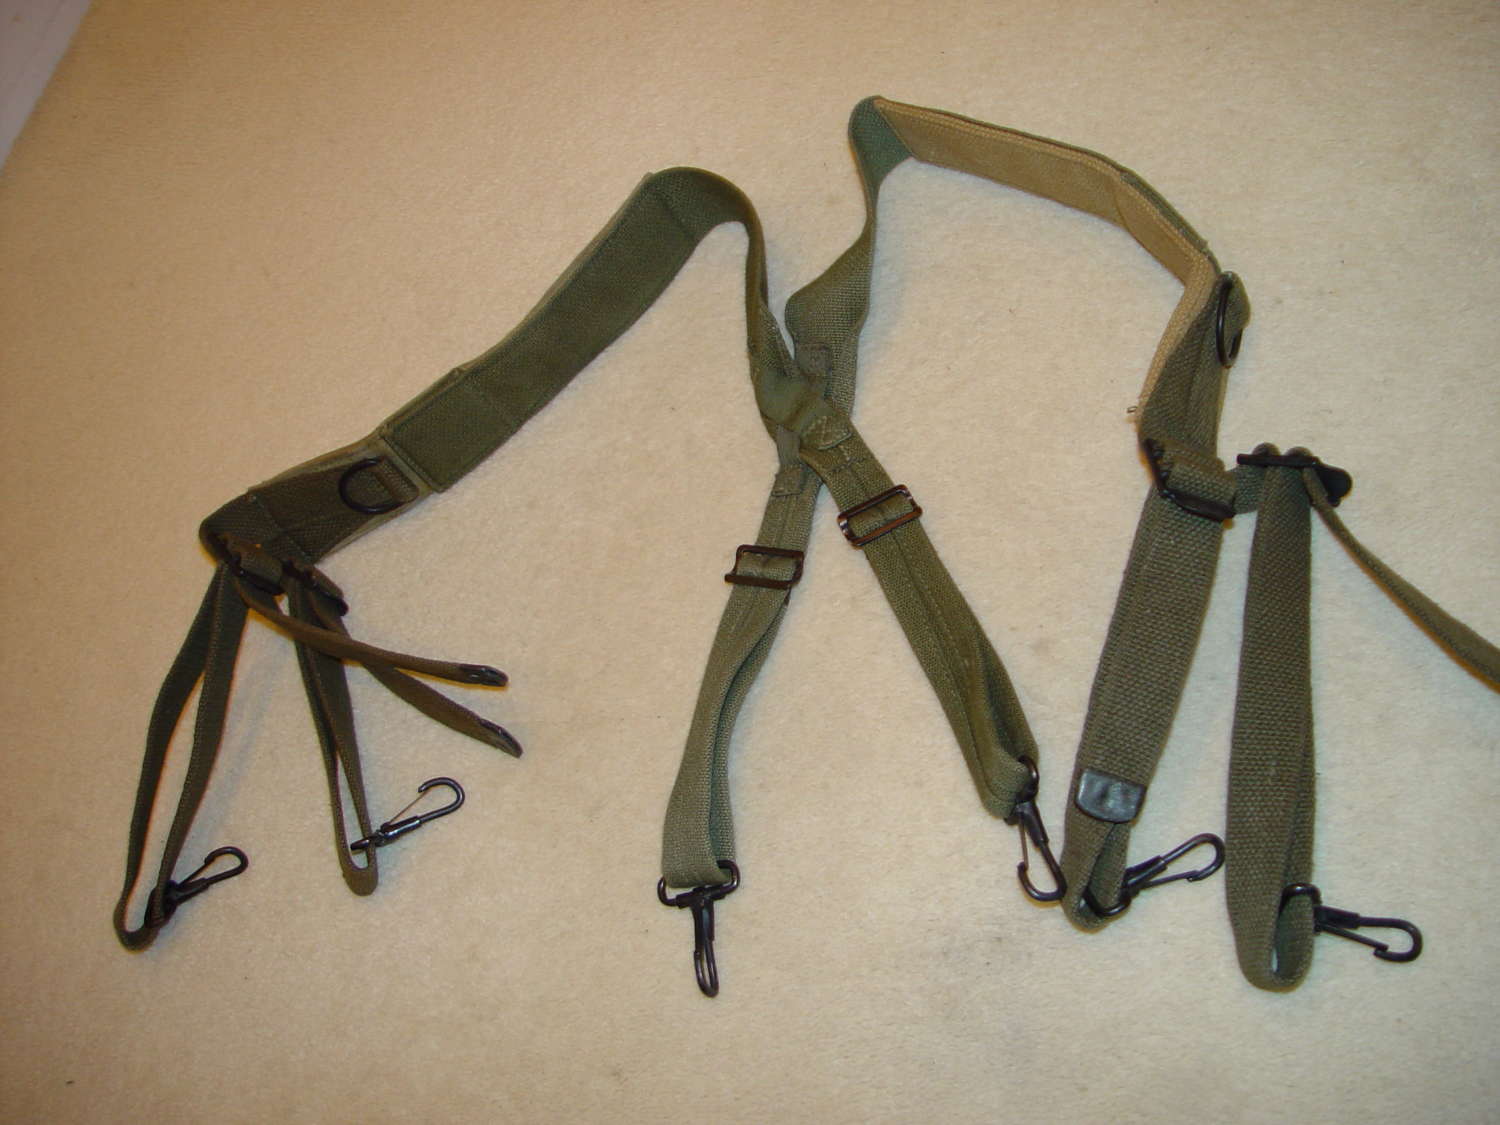 US army M44 suspenders in OD#7